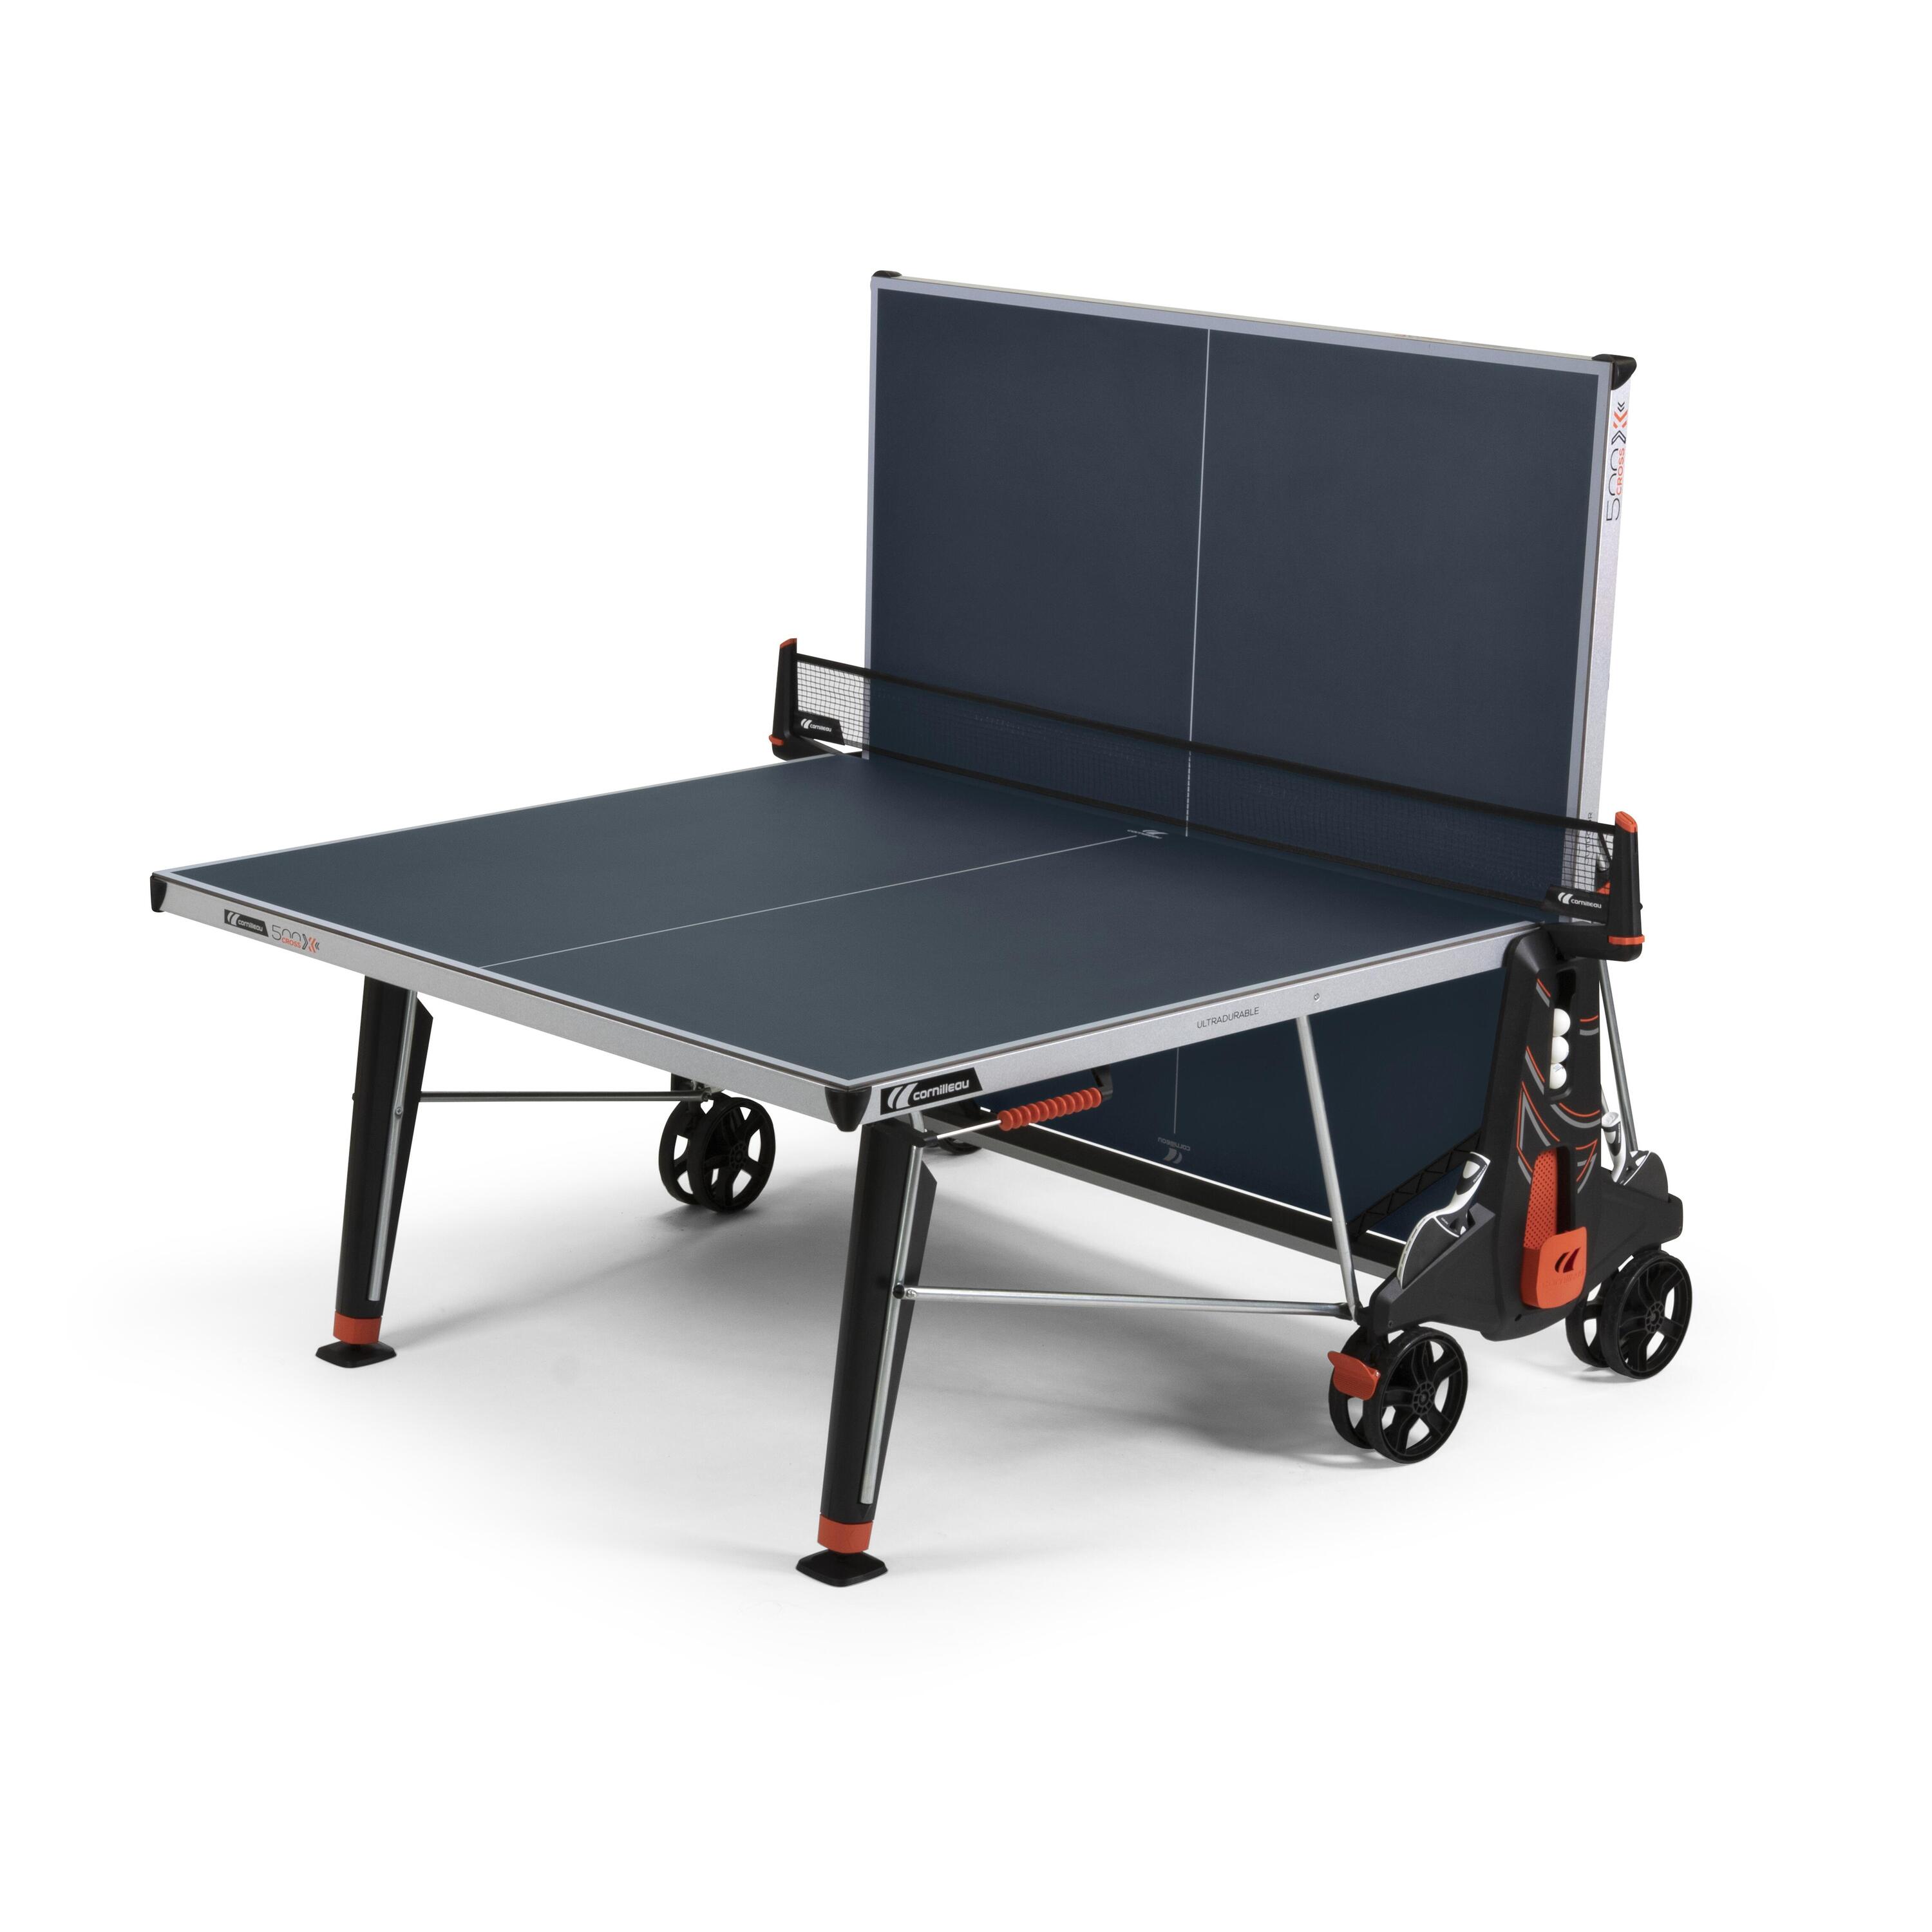 500X Performance Outdoor Table Tennis Table - Blue 2/8